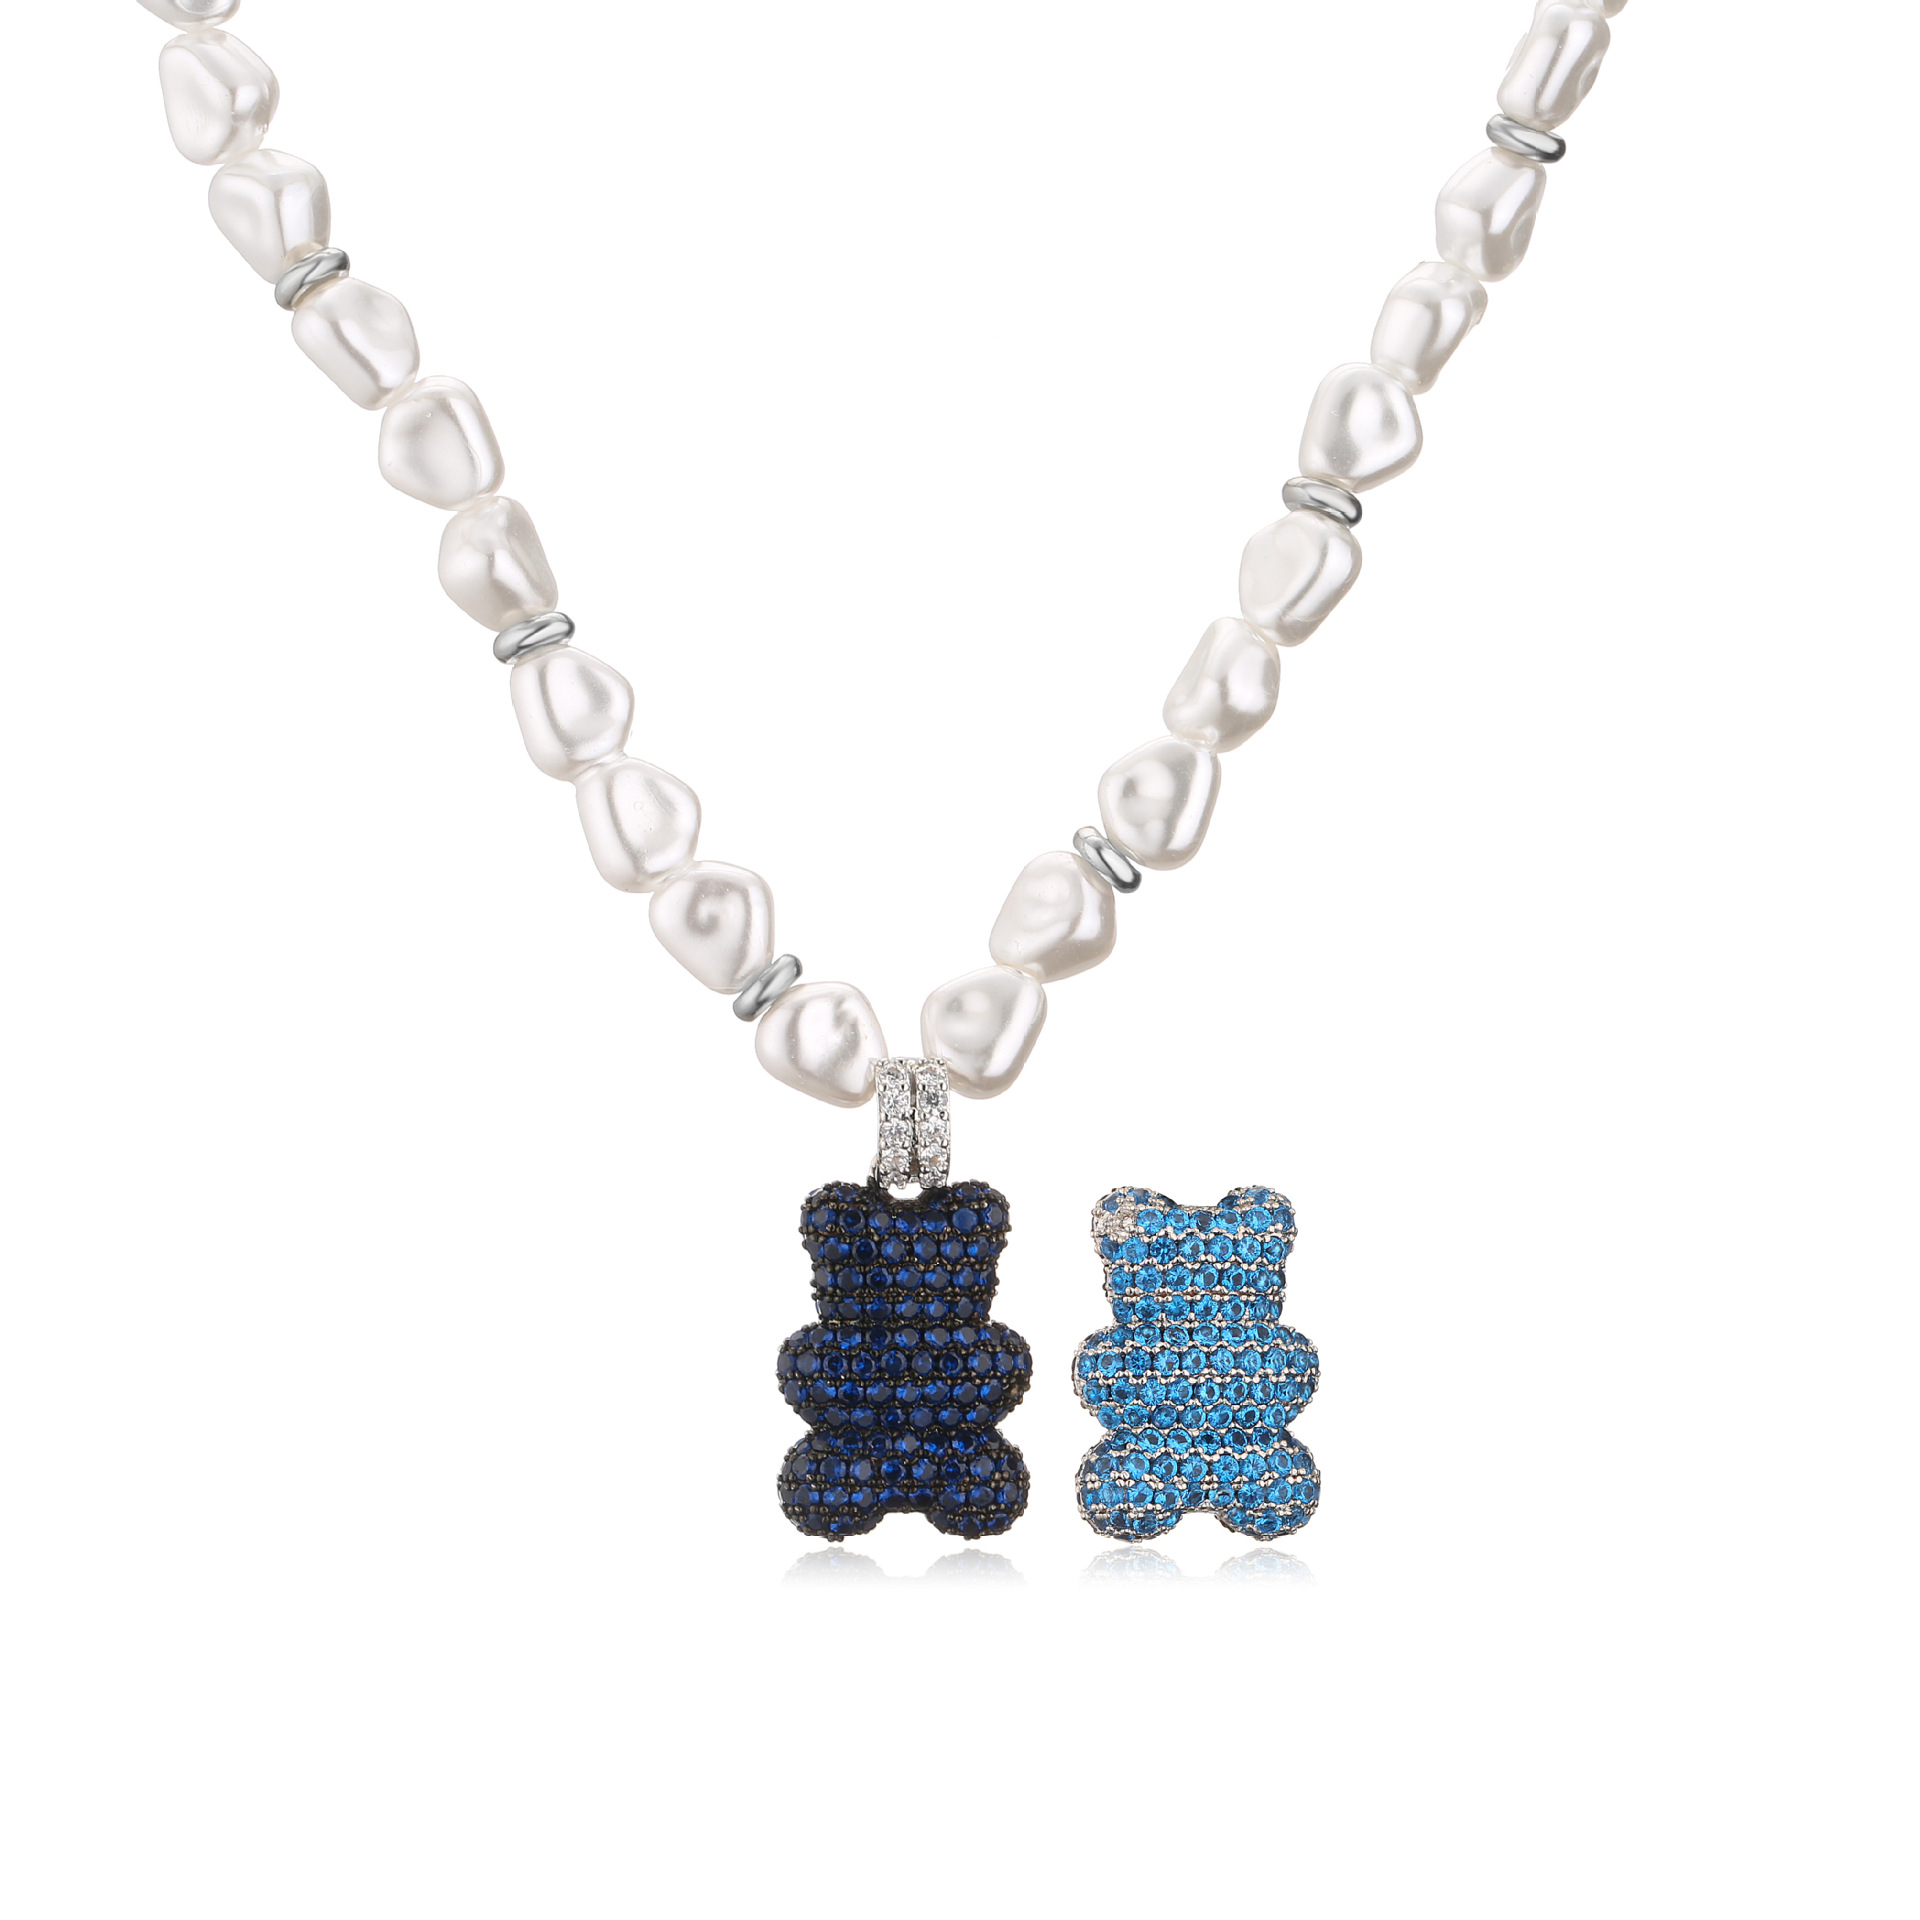 10:Blue Bear Pearl necklace